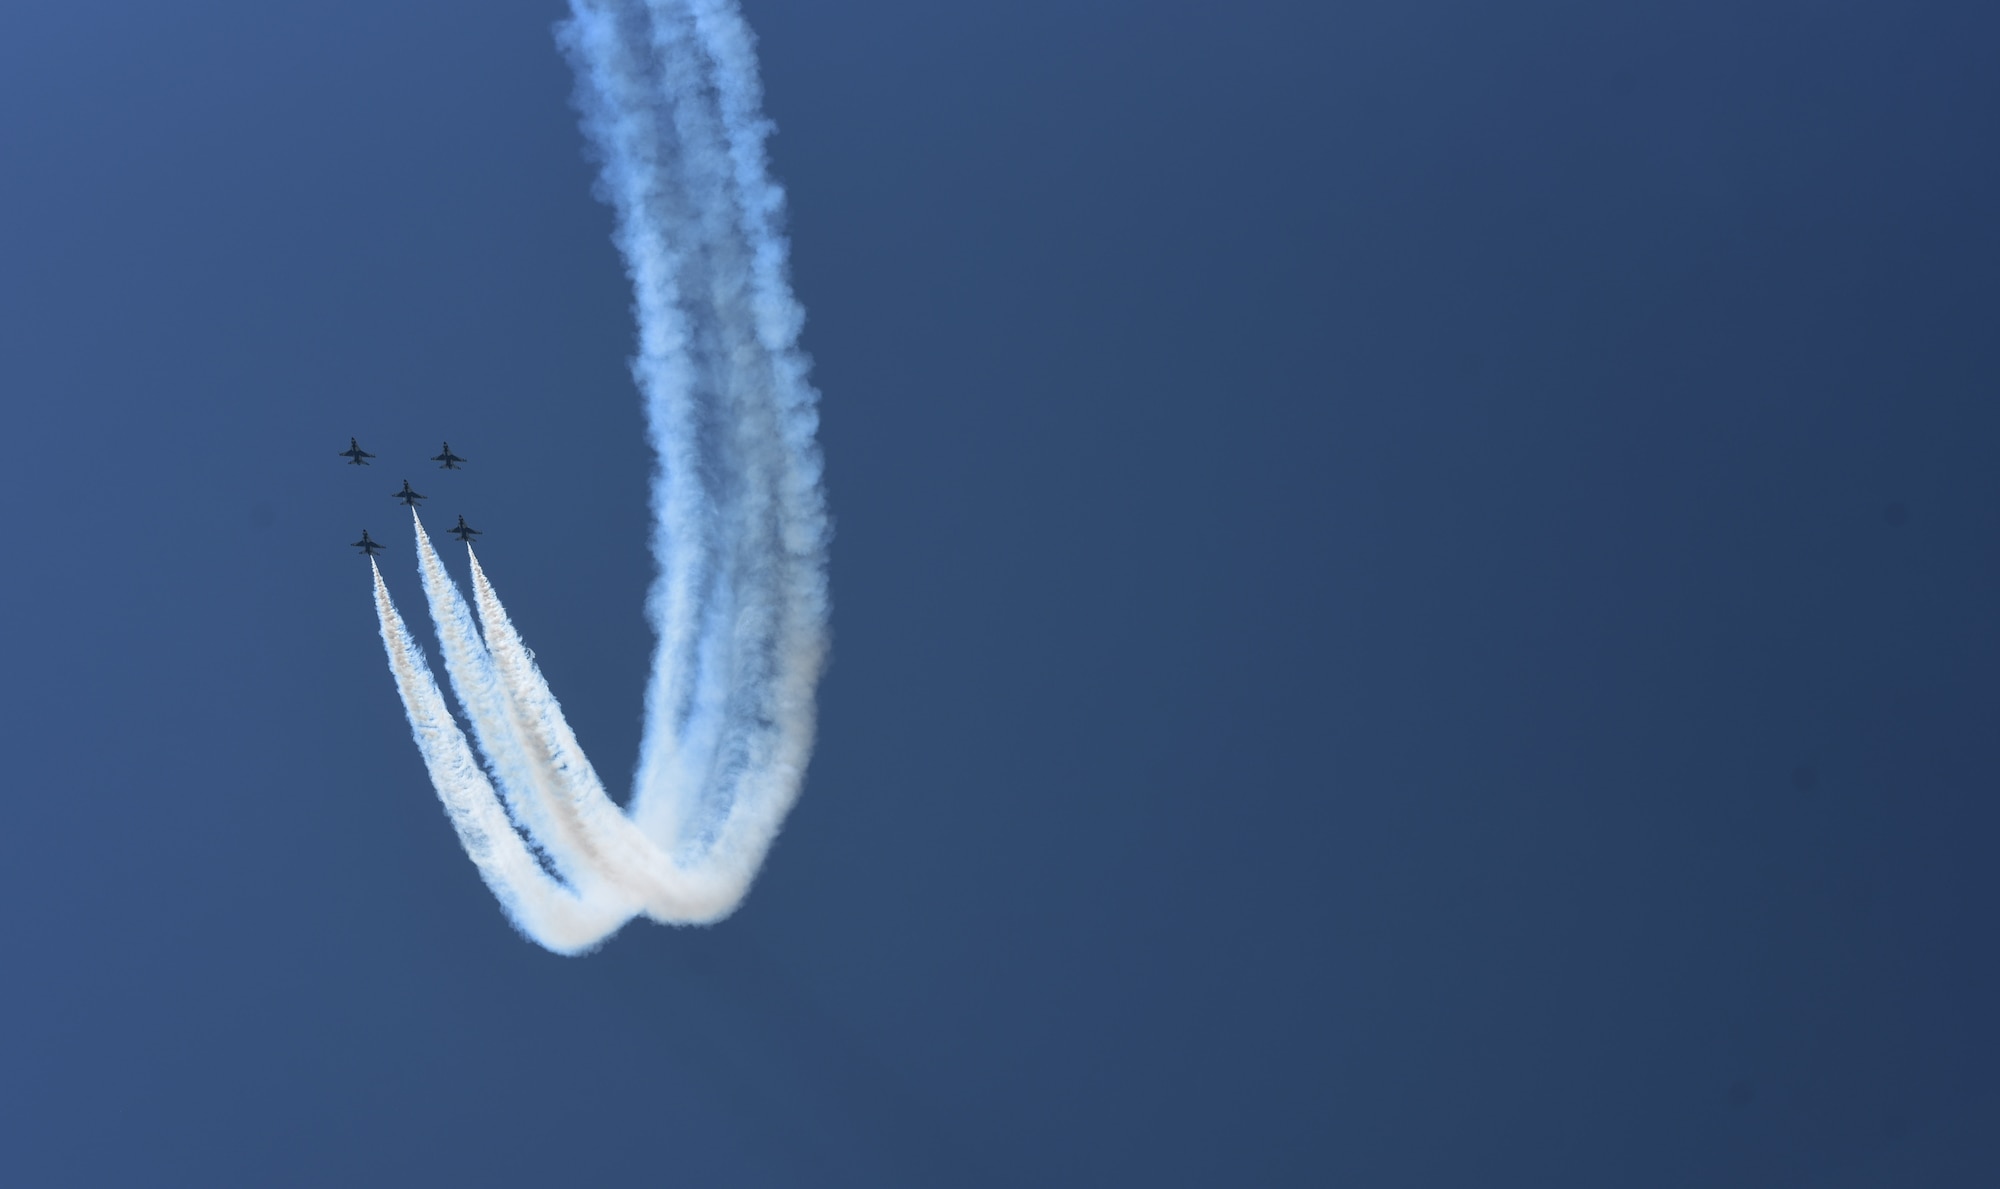 The U.S. Air Force Thunderbirds perform aerial acrobatics during Cheyenne Frontier Days in Cheyenne Wyo., July 25, 2018. The 3600th Air Demonstration unit, the official Air Force Air Demonstration team, was activated May 25, 1953. The unit adopted the name “Thunderbirds,” influenced in part by the strong Native American culture and folklore from the southwestern United States where Luke Air Force Base, Arizona, is located. The airshow provides a chance for the local community and worldwide visitors of CFD to see the U.S. Air Force in action over the skies of Cheyenne. (U.S. Air Force photo by Senior Airman Breanna Carter)